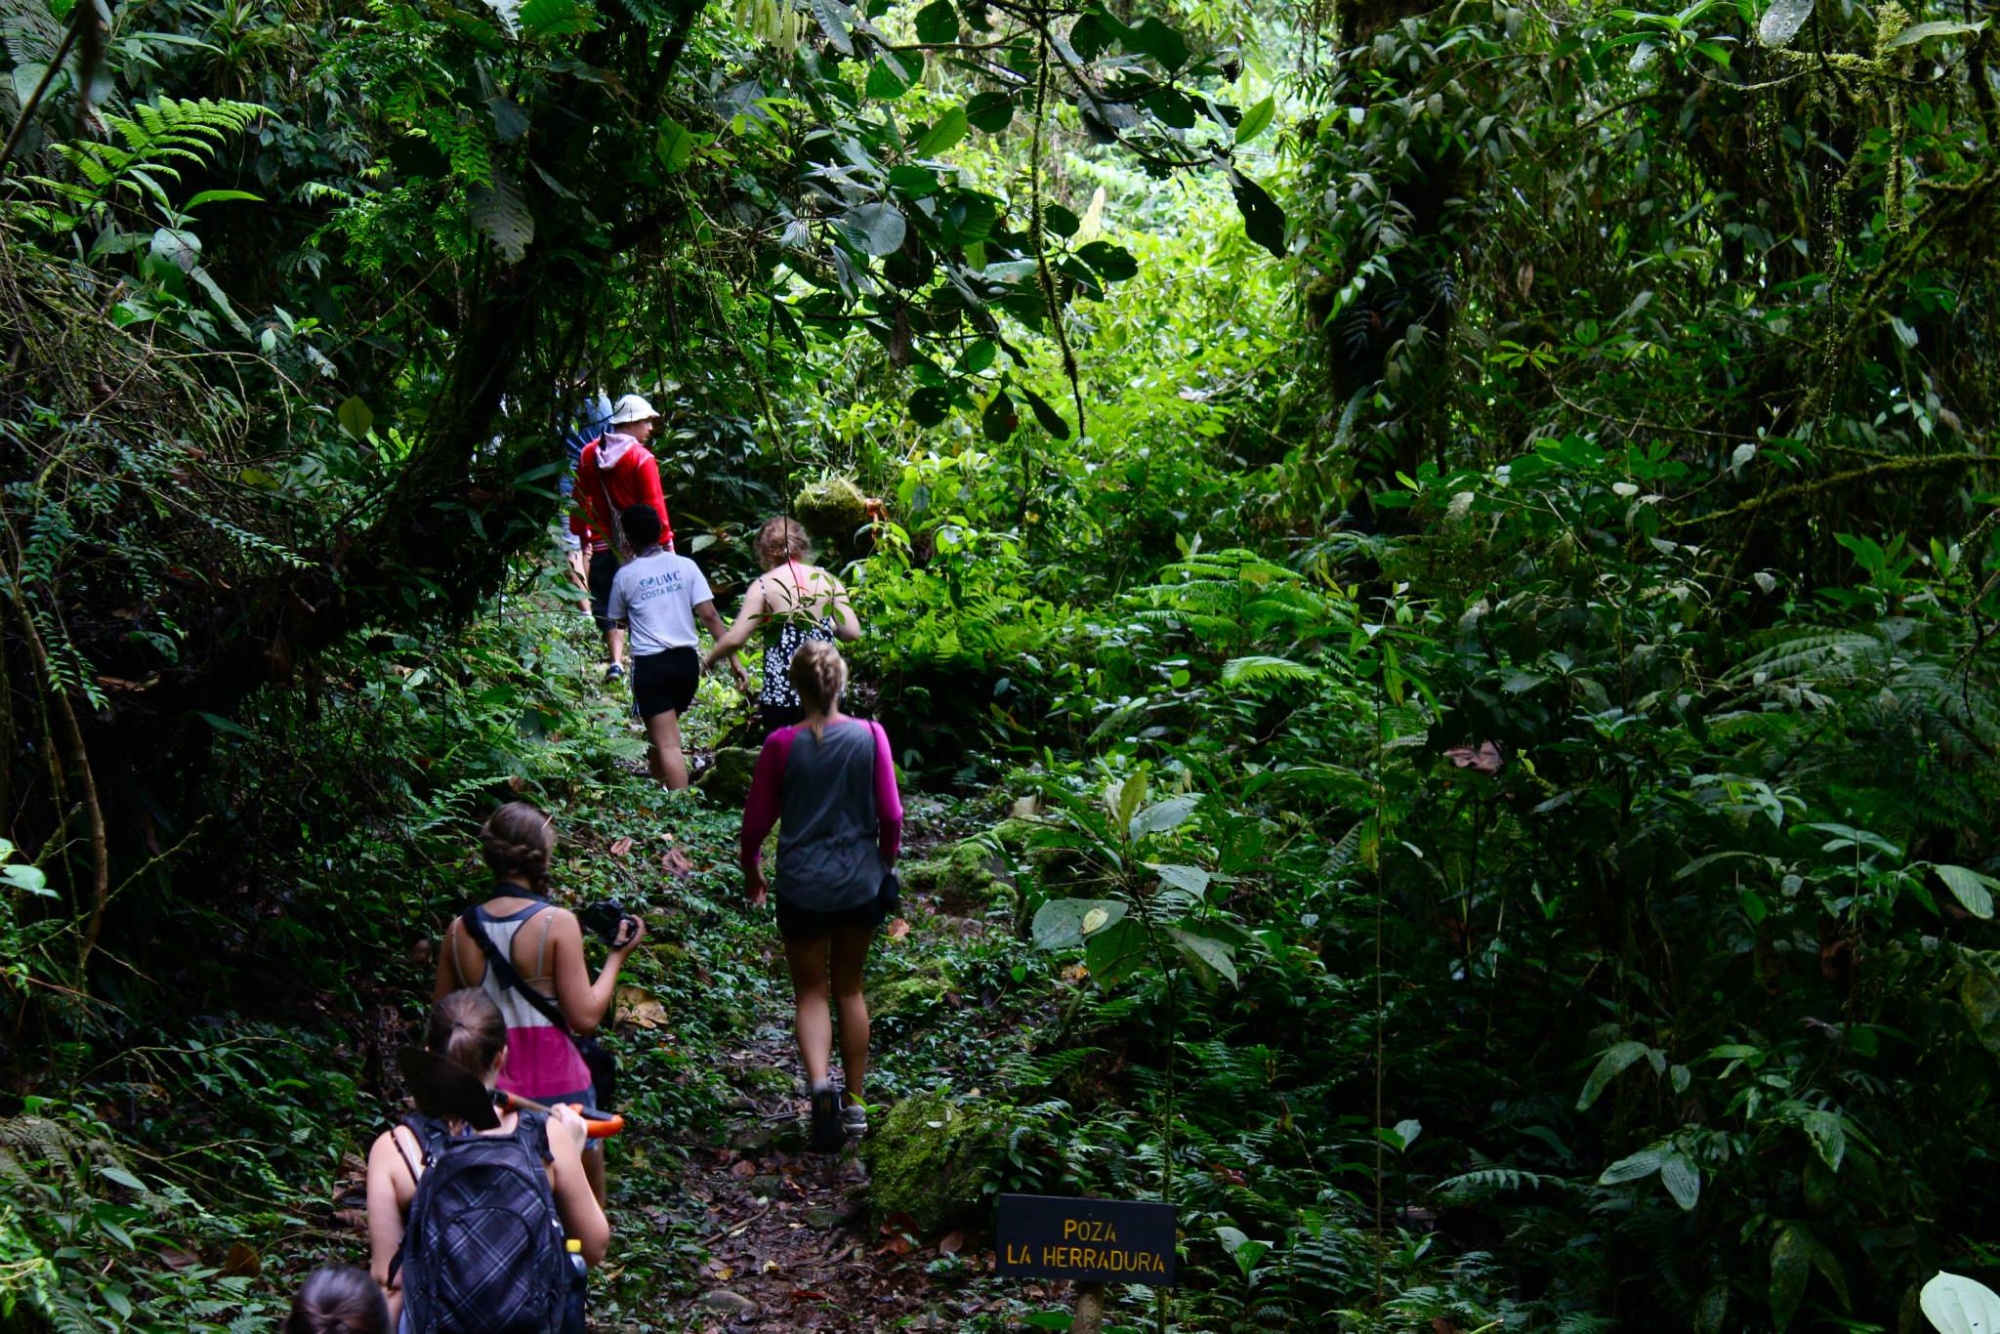 Students at UWC Costa Rica take part in an outdoor expedition